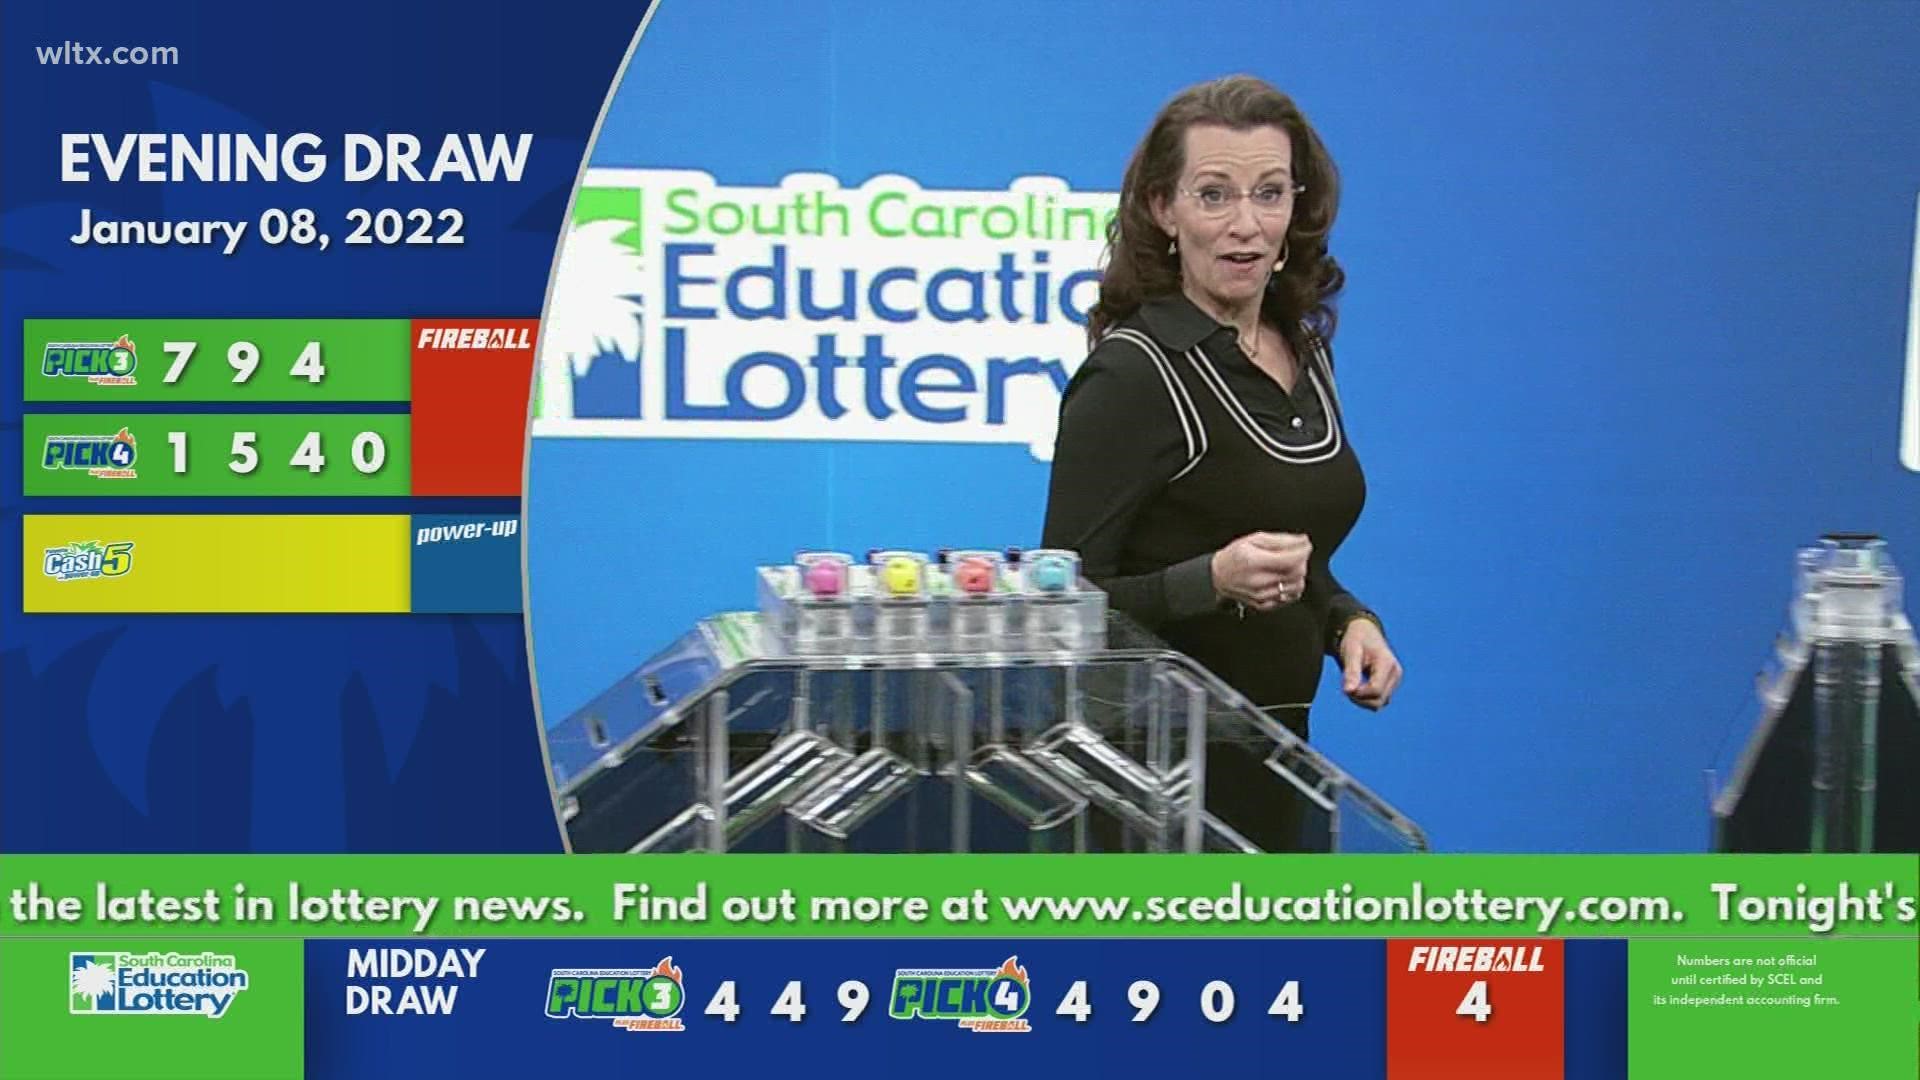 Here are the winning numbers for the evening South Carolina lottery results for January 8, 2022.